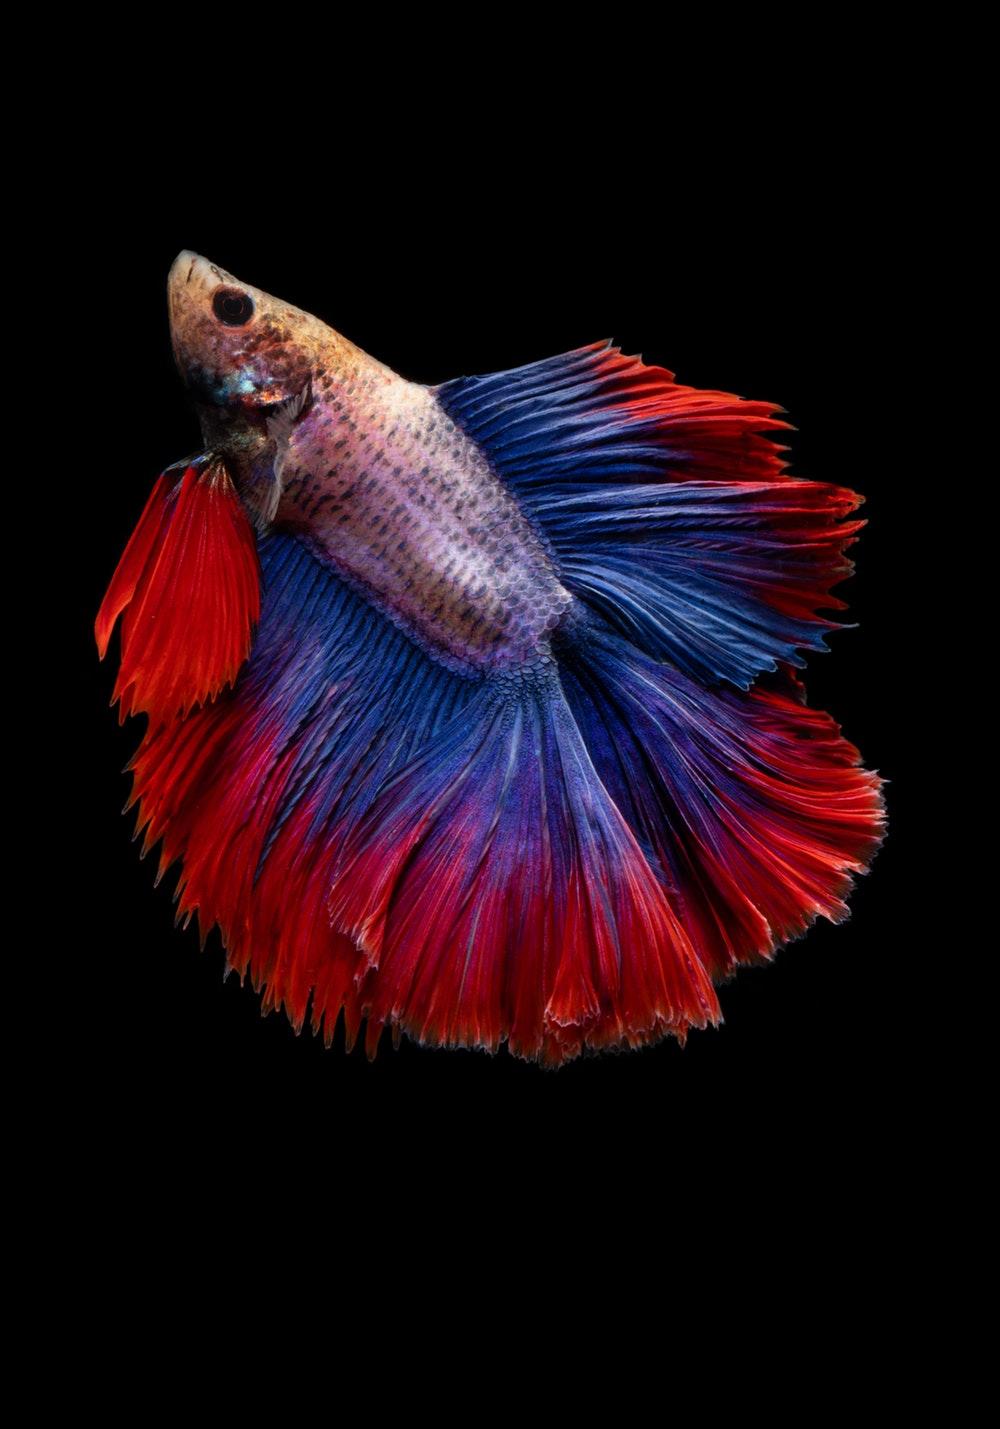 Betta Fish Picture. Download Free Image